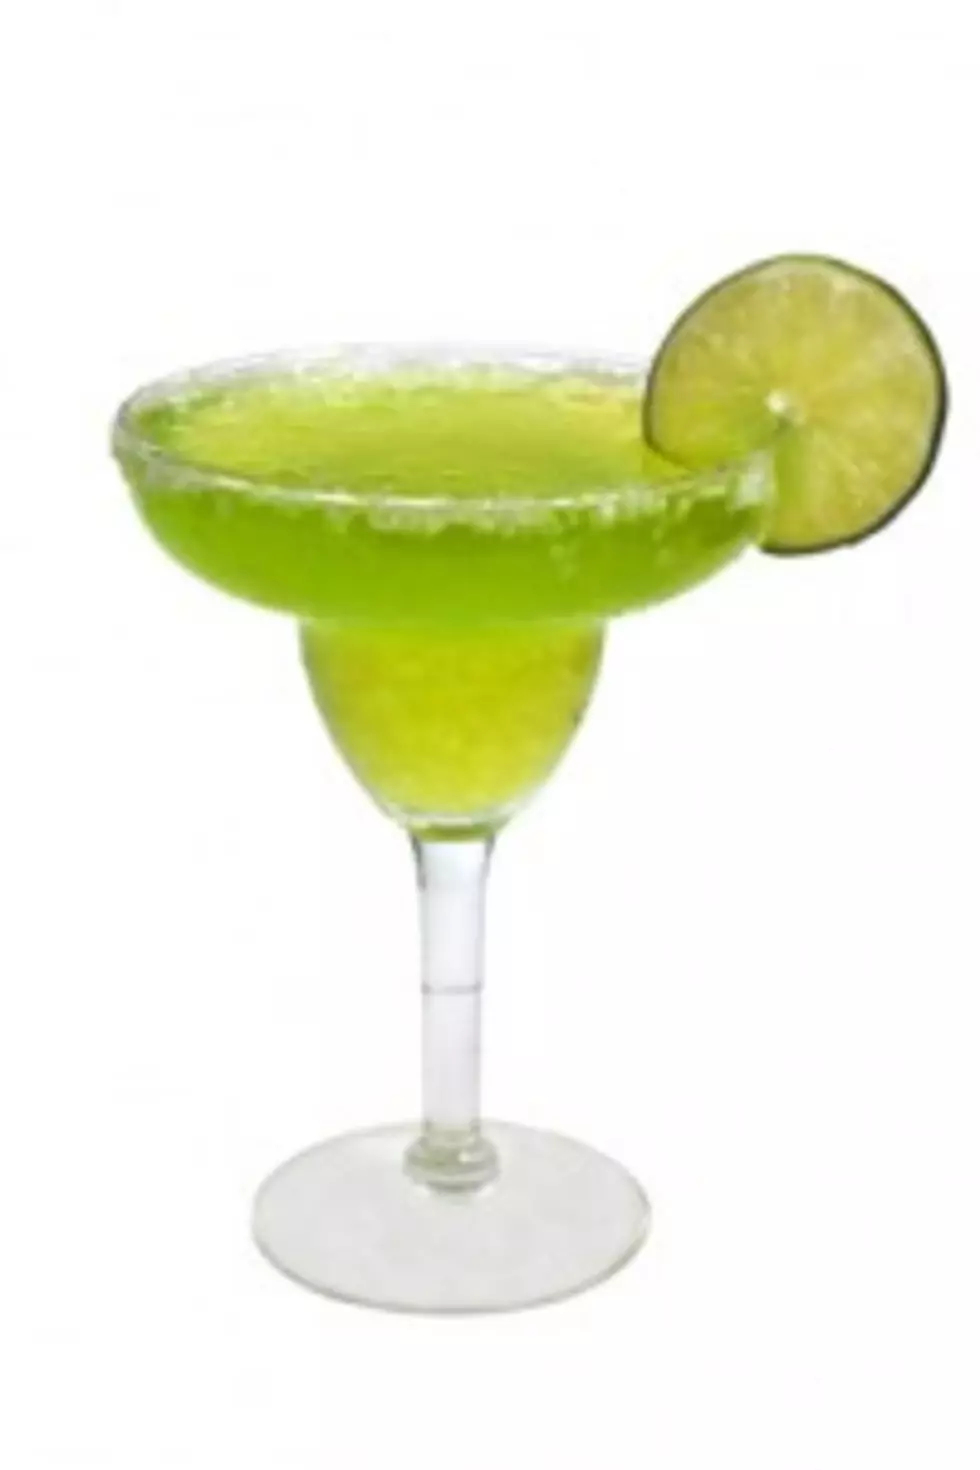 Drink Of The Week &#8211; Green Apple Martini &#8211; Perfect for Parade Day